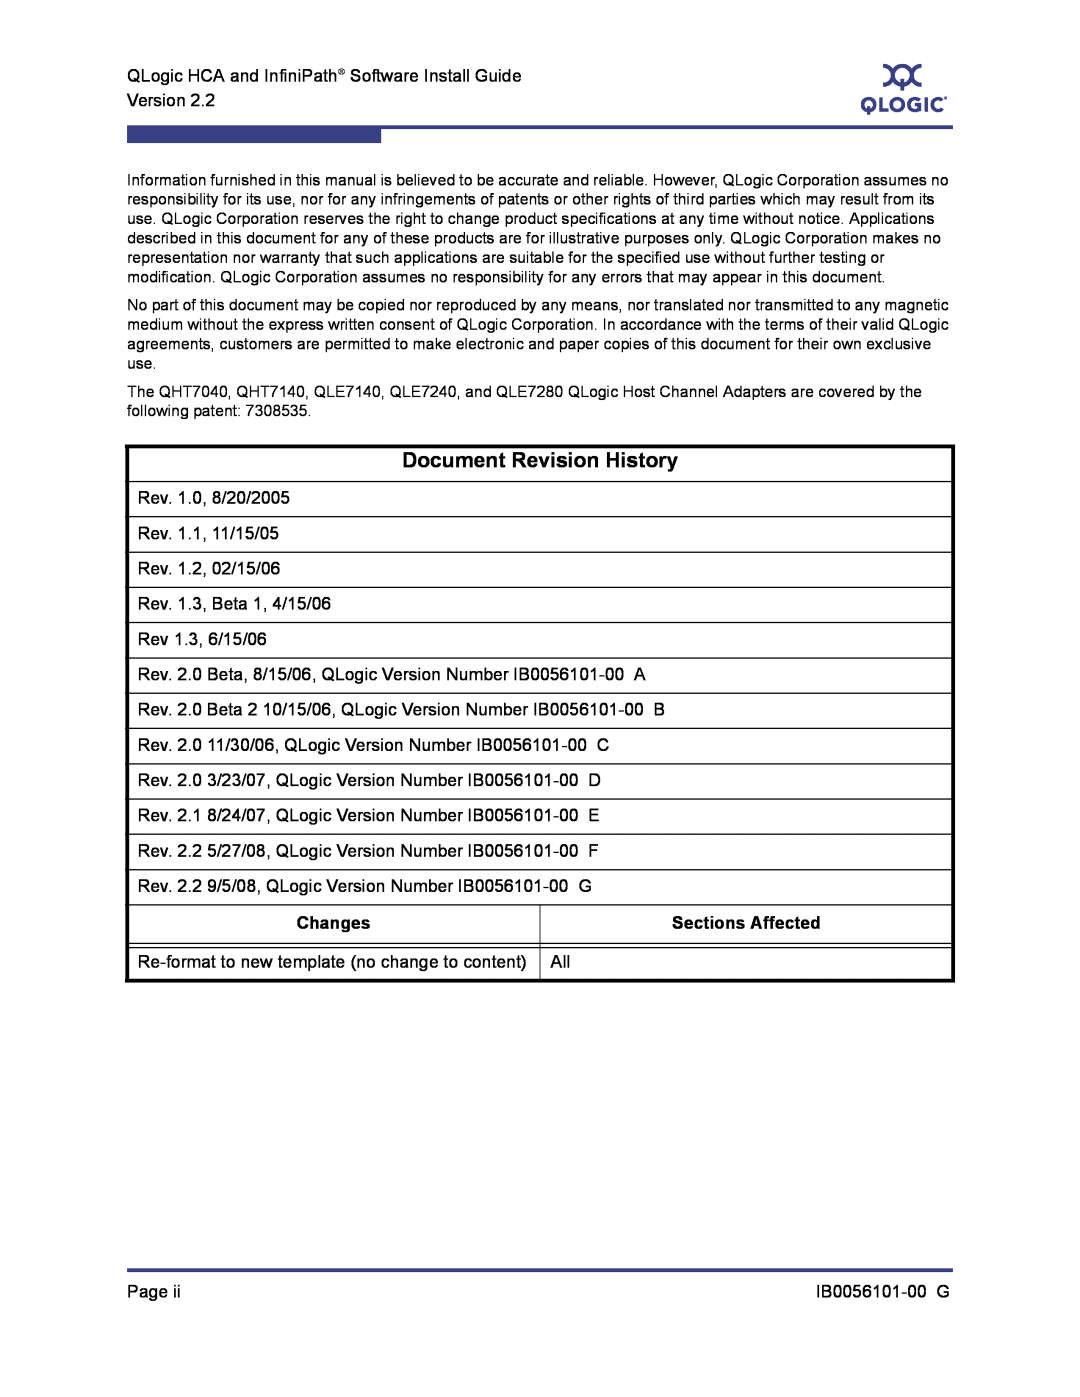 Q-Logic IB0056101-00 G manual Document Revision History, Changes, Sections Affected 